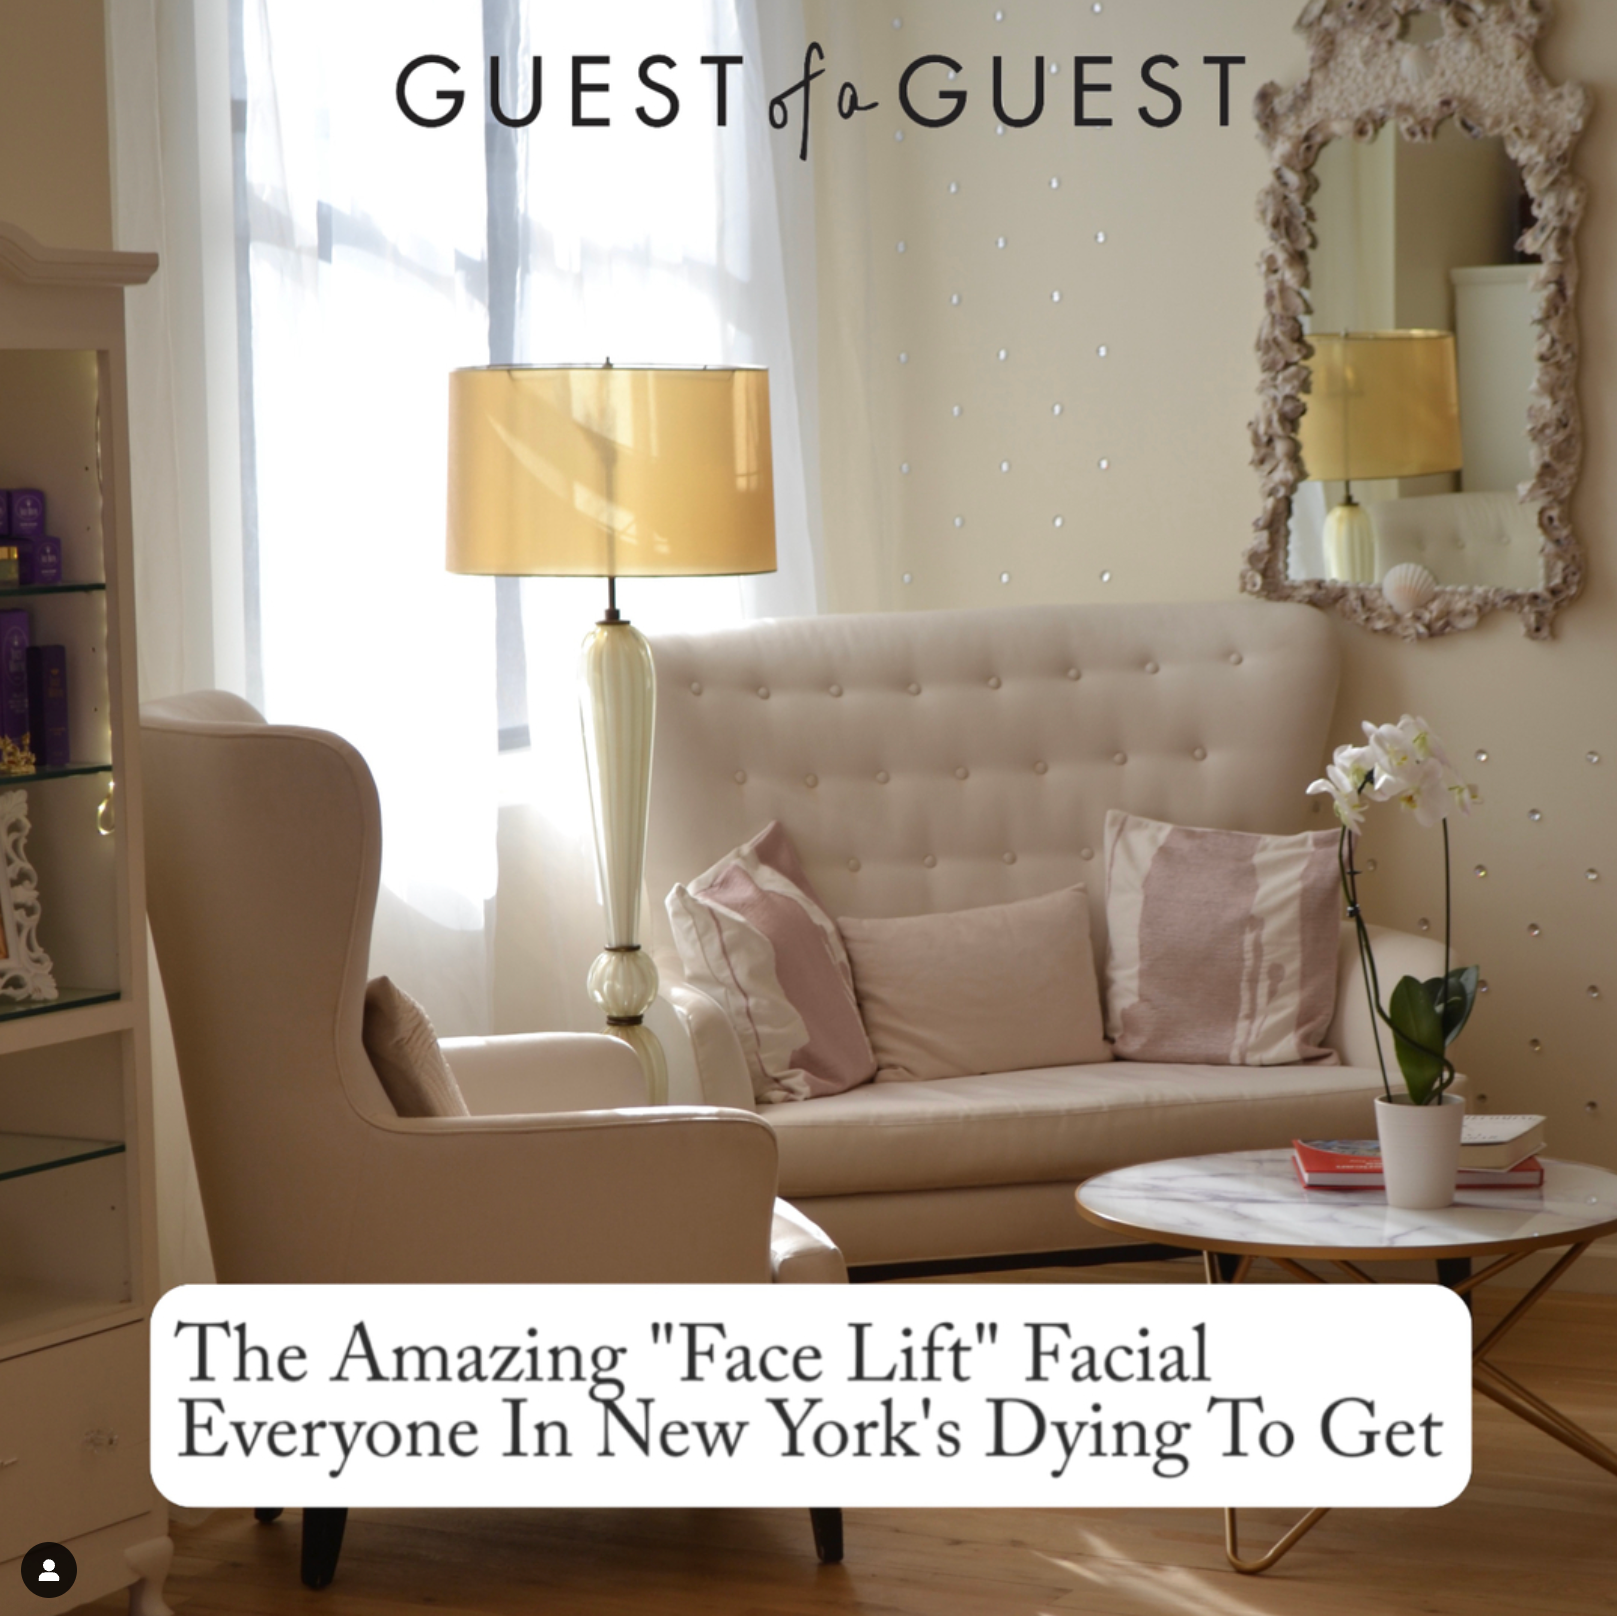 "The Amazing "Face Lift" Facial Everyone In New York's Dying To Get" | Guest of a Guest